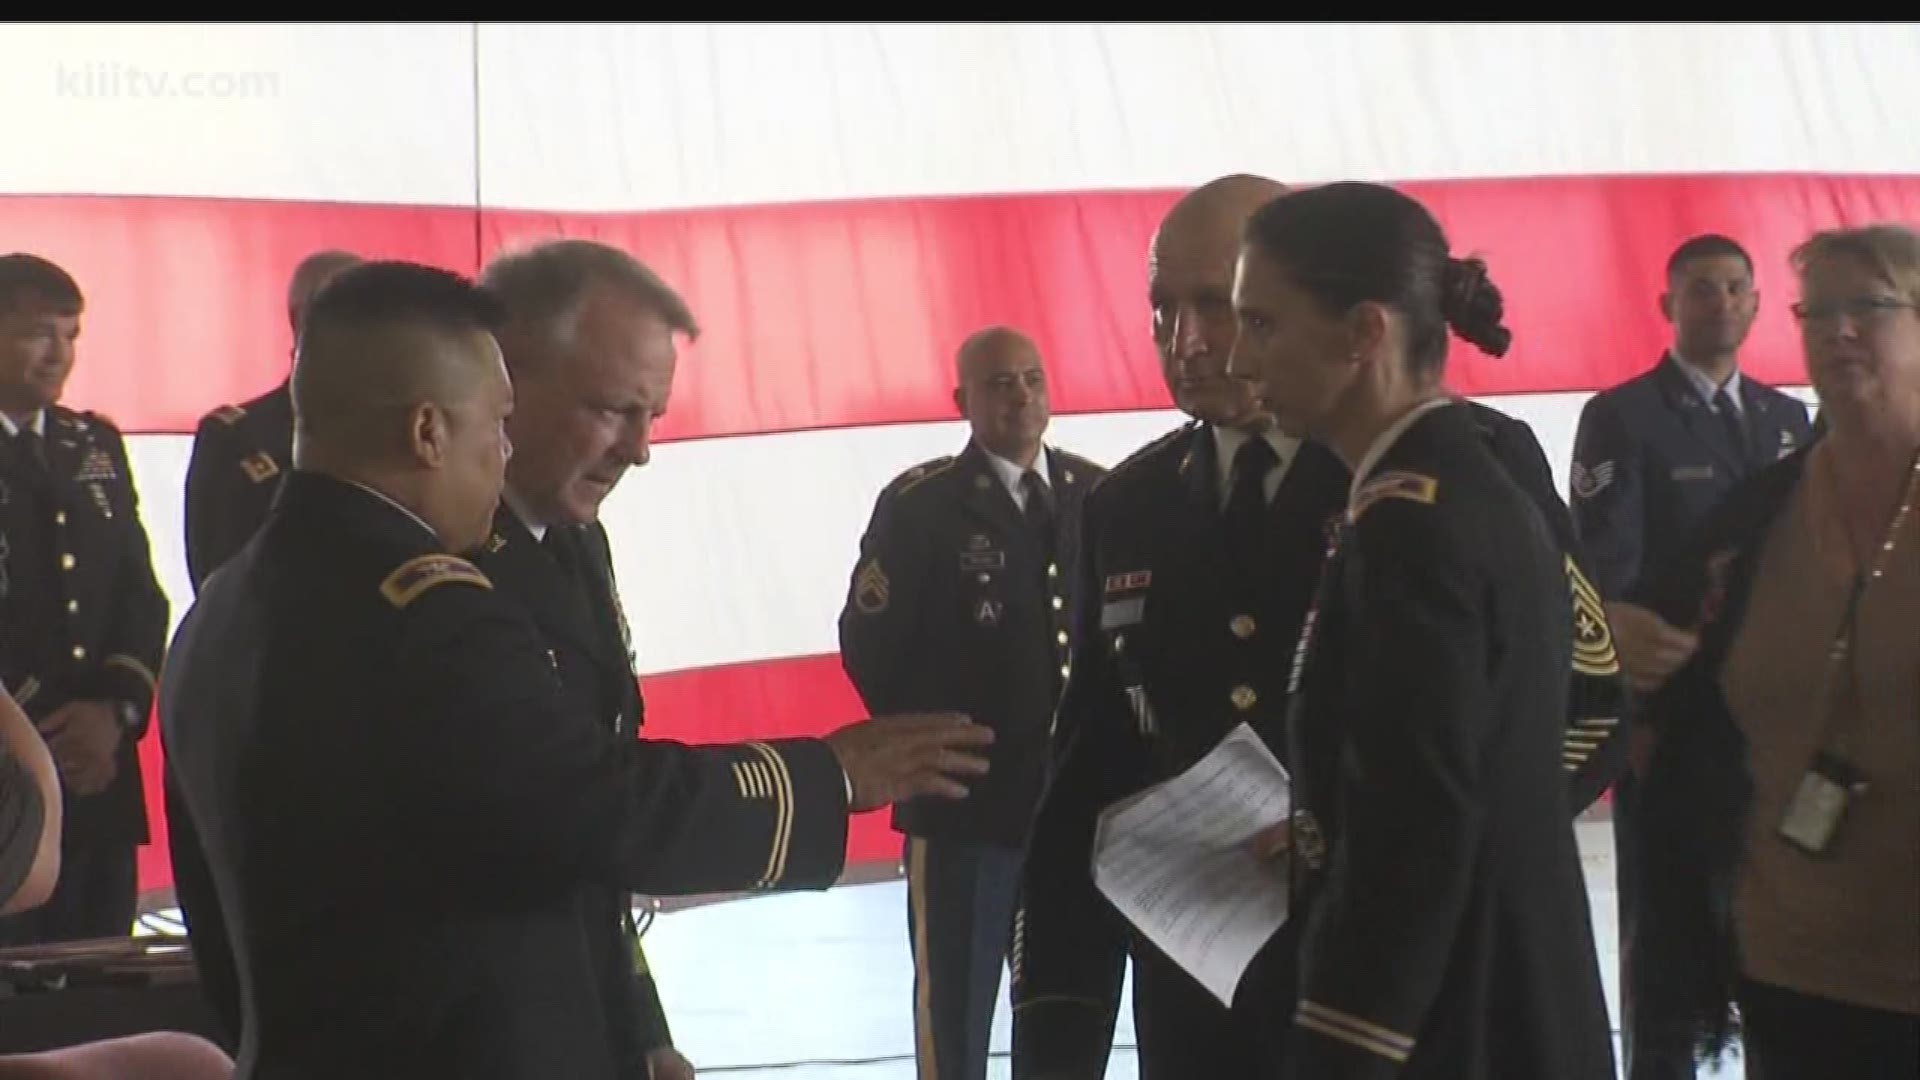 The Corpus Christi Army Depot held a special change of command ceremony Friday morning celebrating a new chapter.